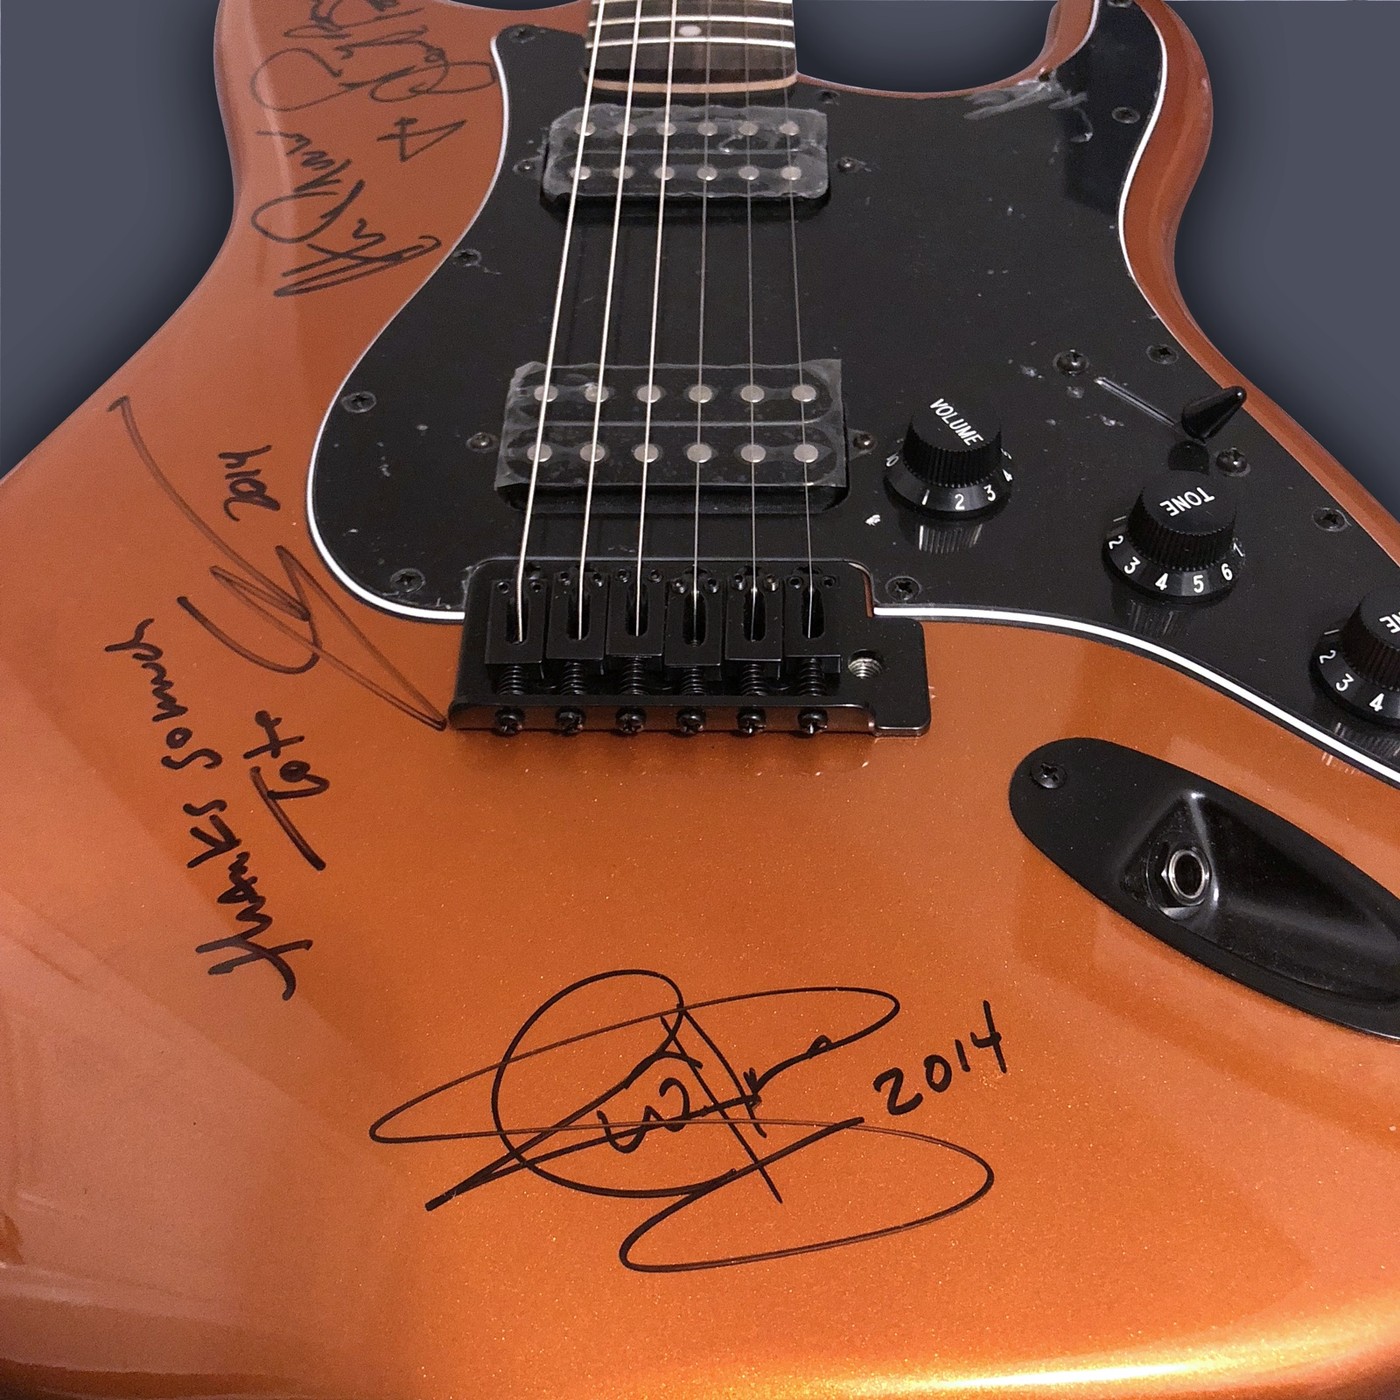 Toto Signed Fender Squier Guitar Collectionzz